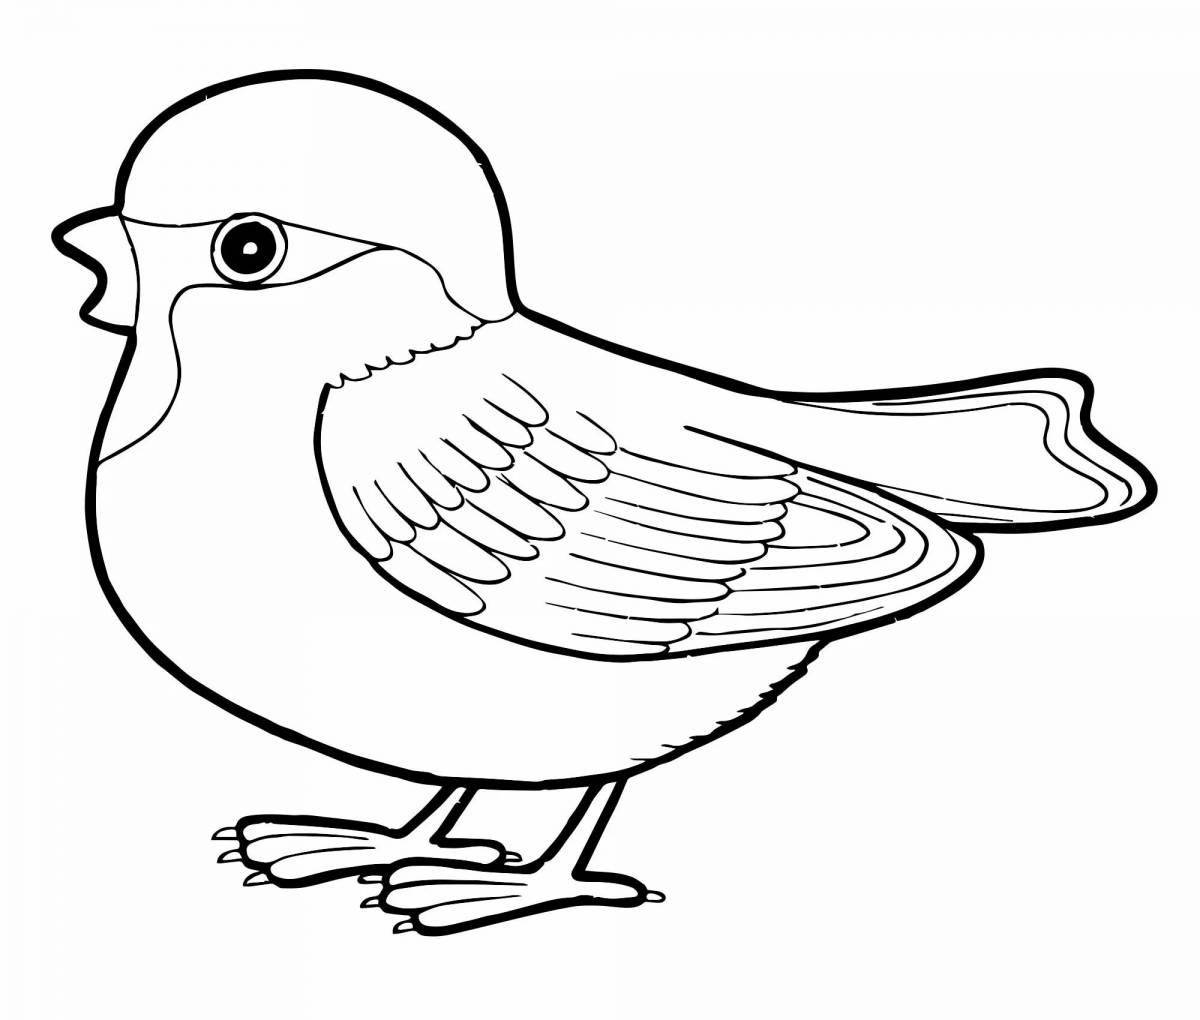 Adorable bird coloring page for 2-3 year olds